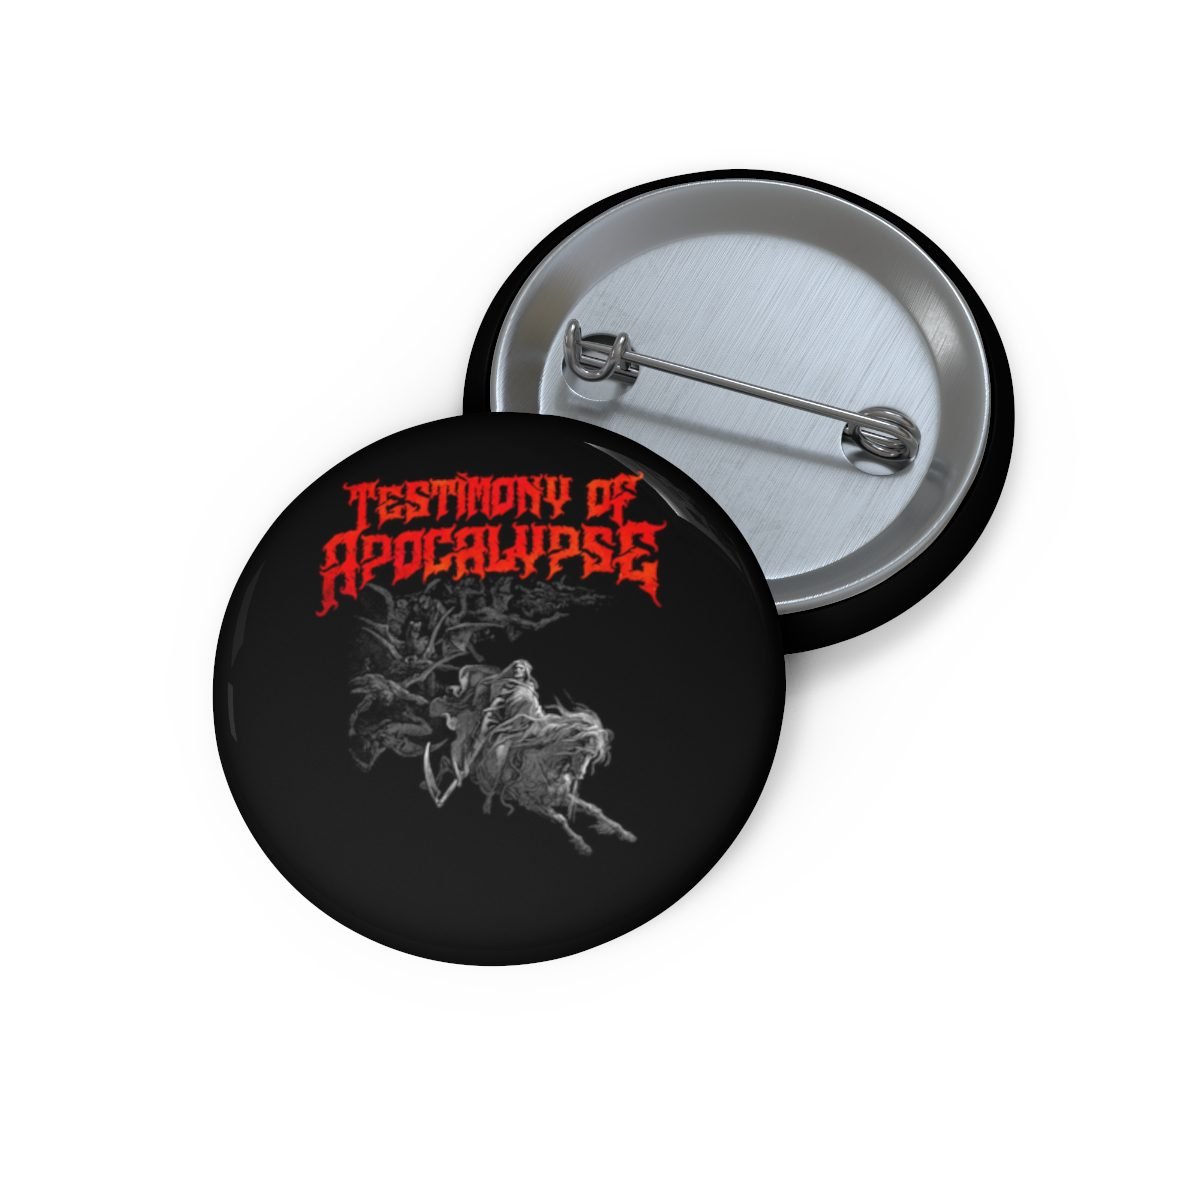 Testimony of Apocalypse – Deathly Visions Pin Buttons